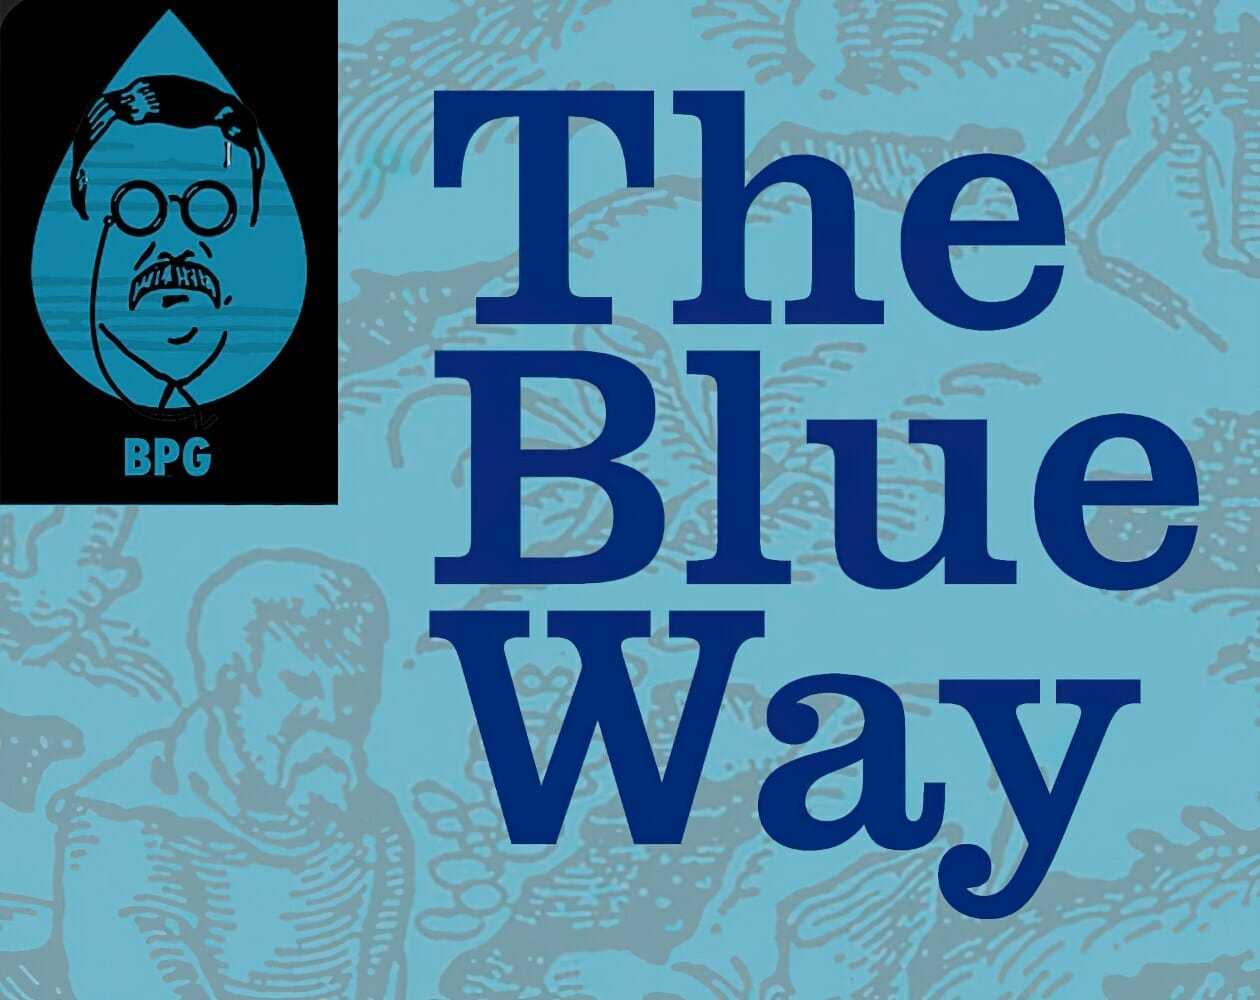 The Blue Way